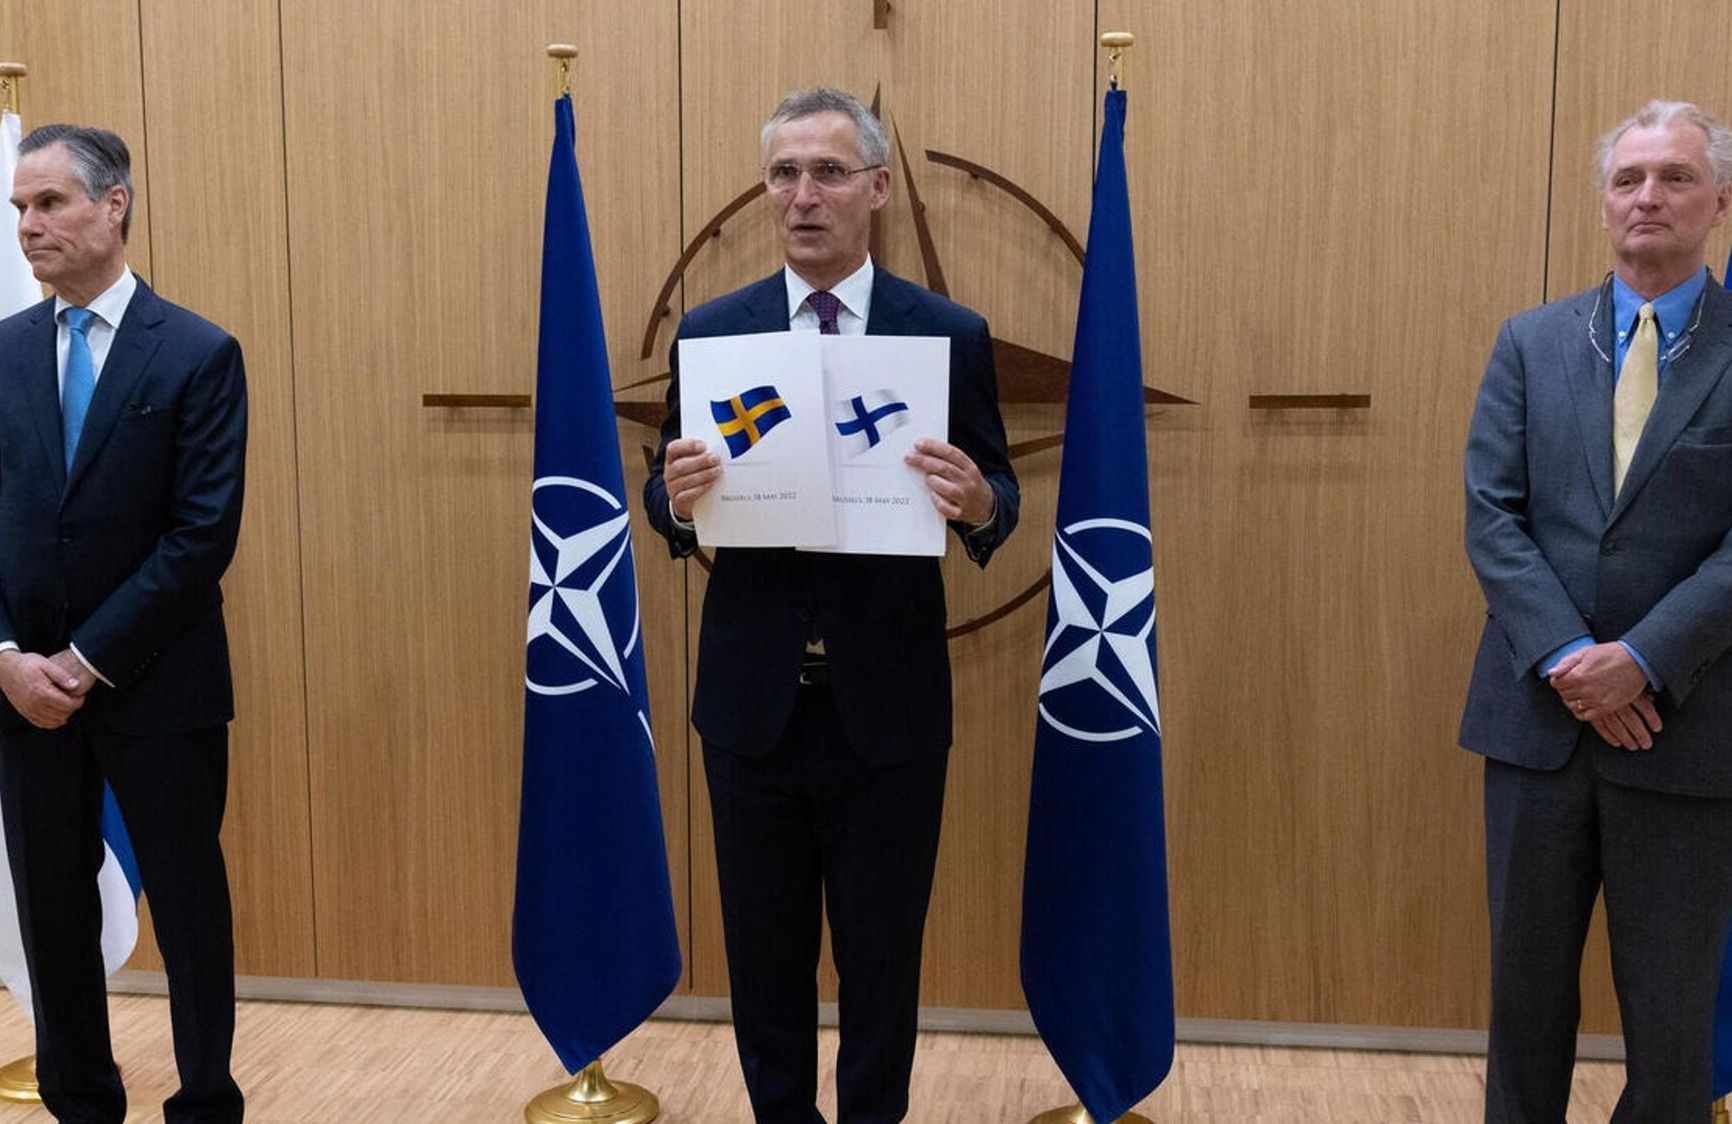 Finnish and Swedish Ambassadors to NATO submit applications for NATO membership to Secretary General Jens Stoltenberg